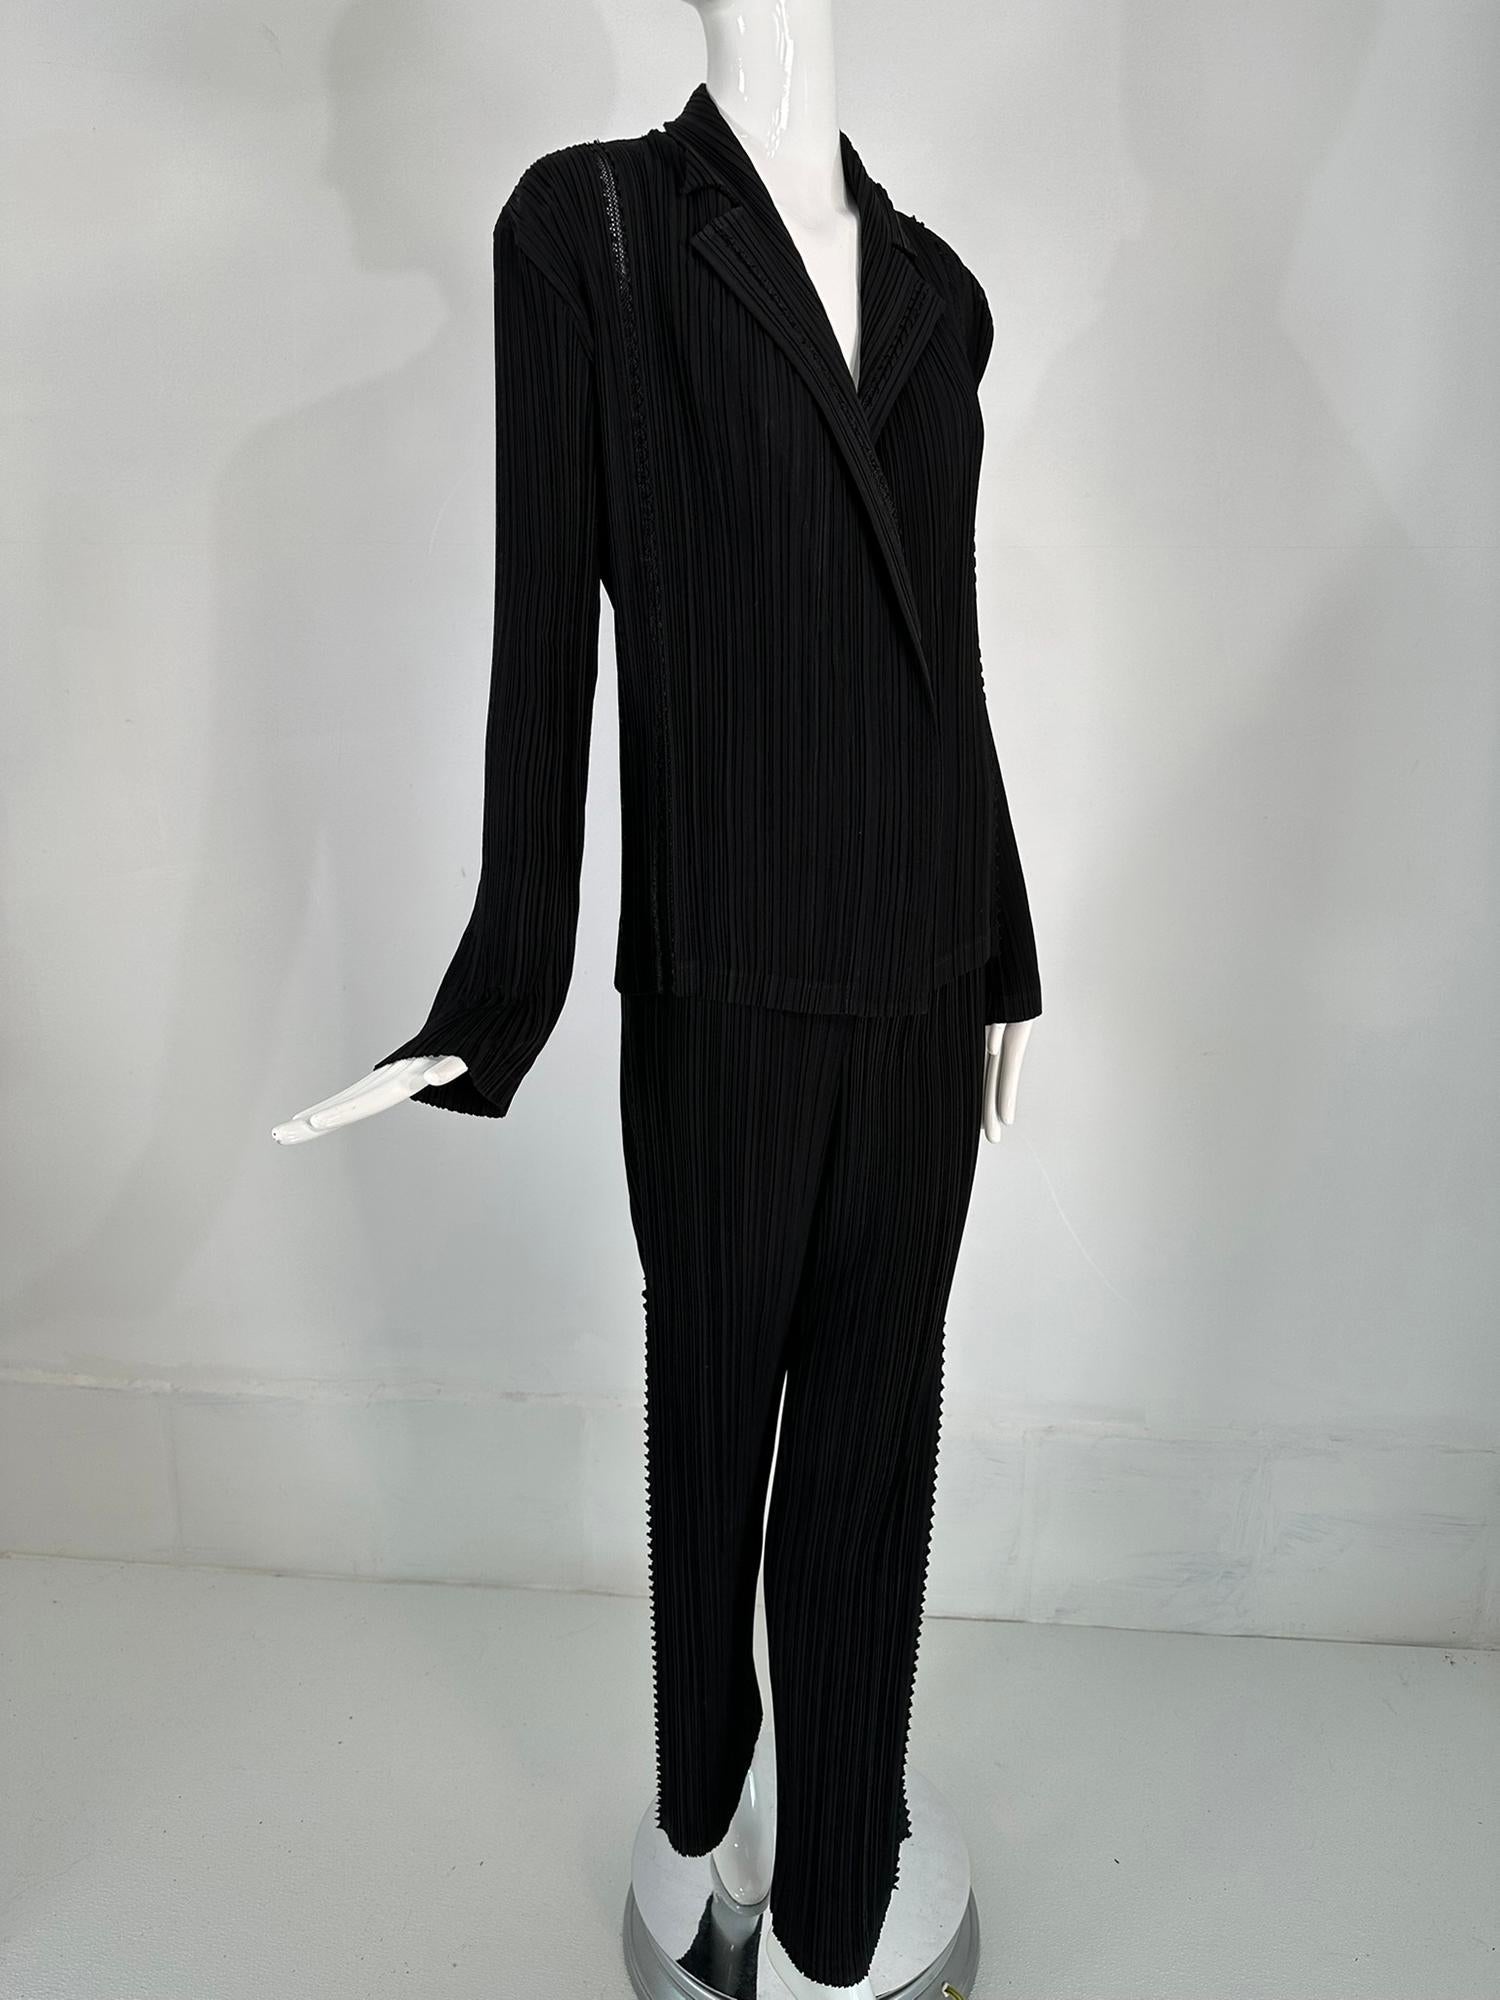 Women's Issey Miyake Fete 2pc Jacket & Pant Black Pleats with Open Mesh Insertion Size 4 For Sale